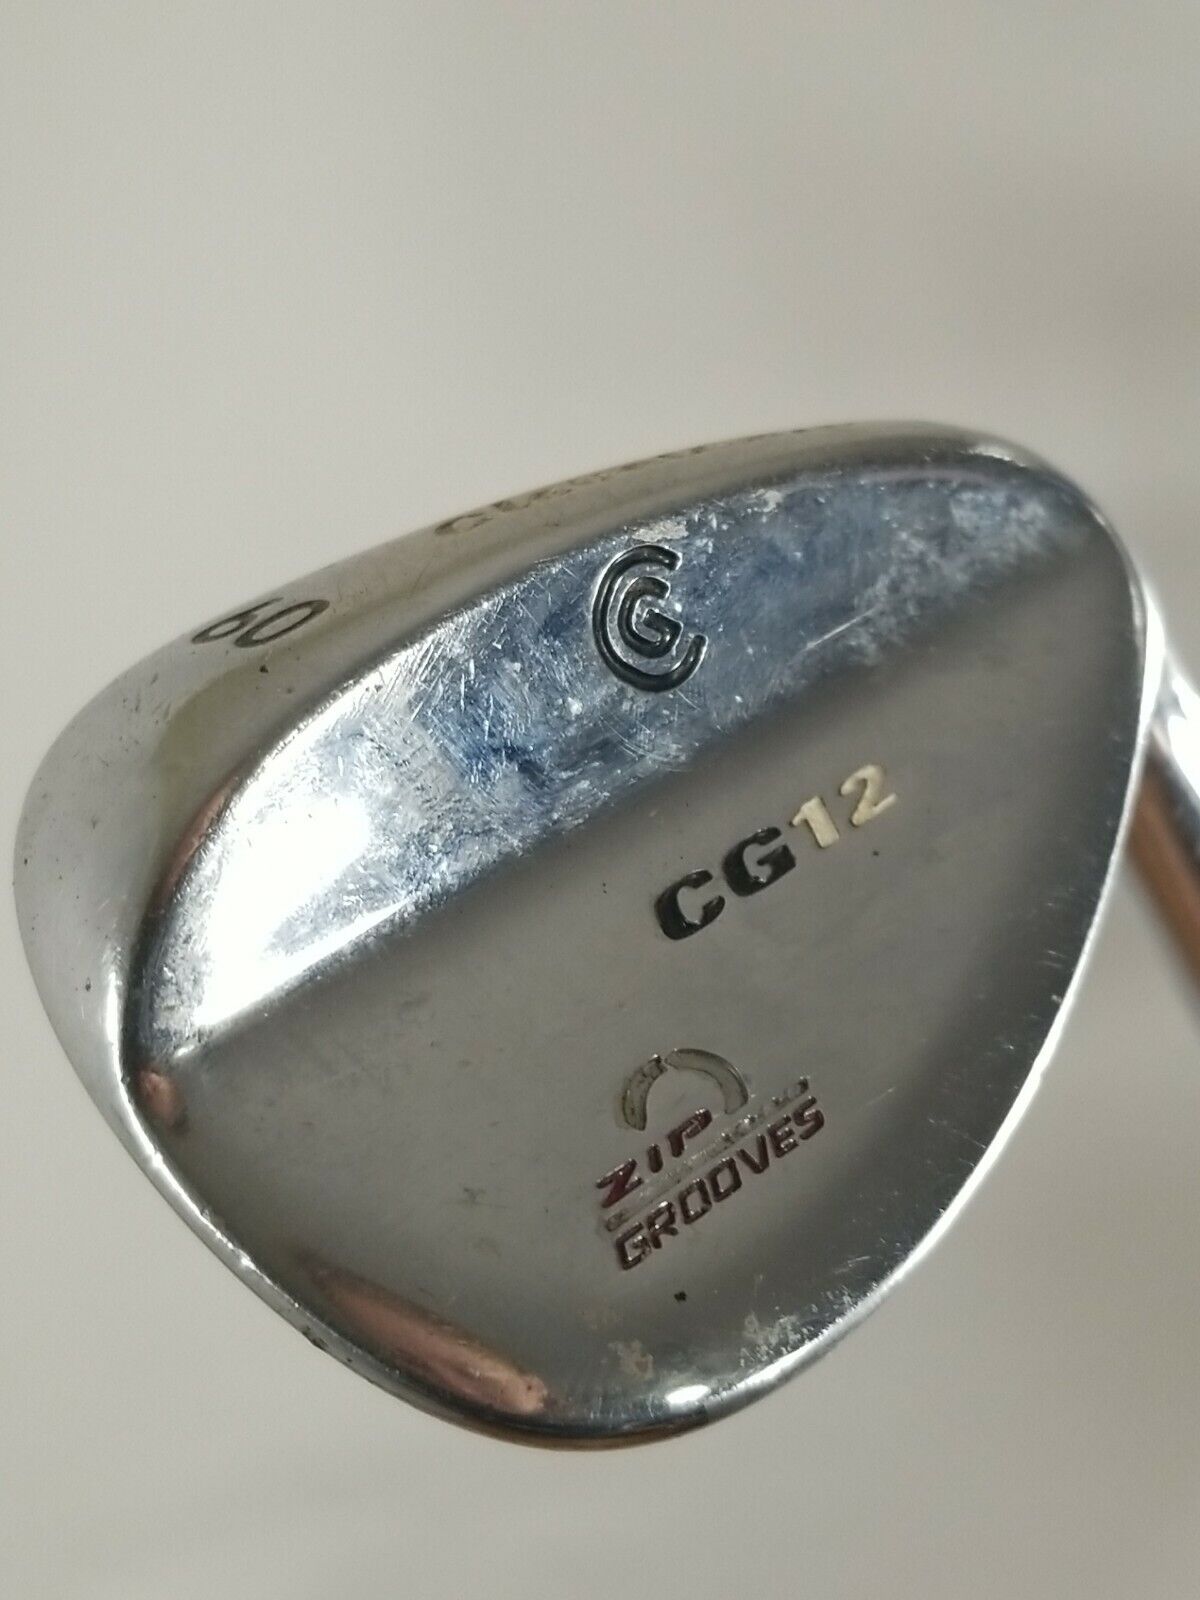 CLEVELAND CG12 60* WEDGE WEDGE CLEVELAND TRACTION GOOD